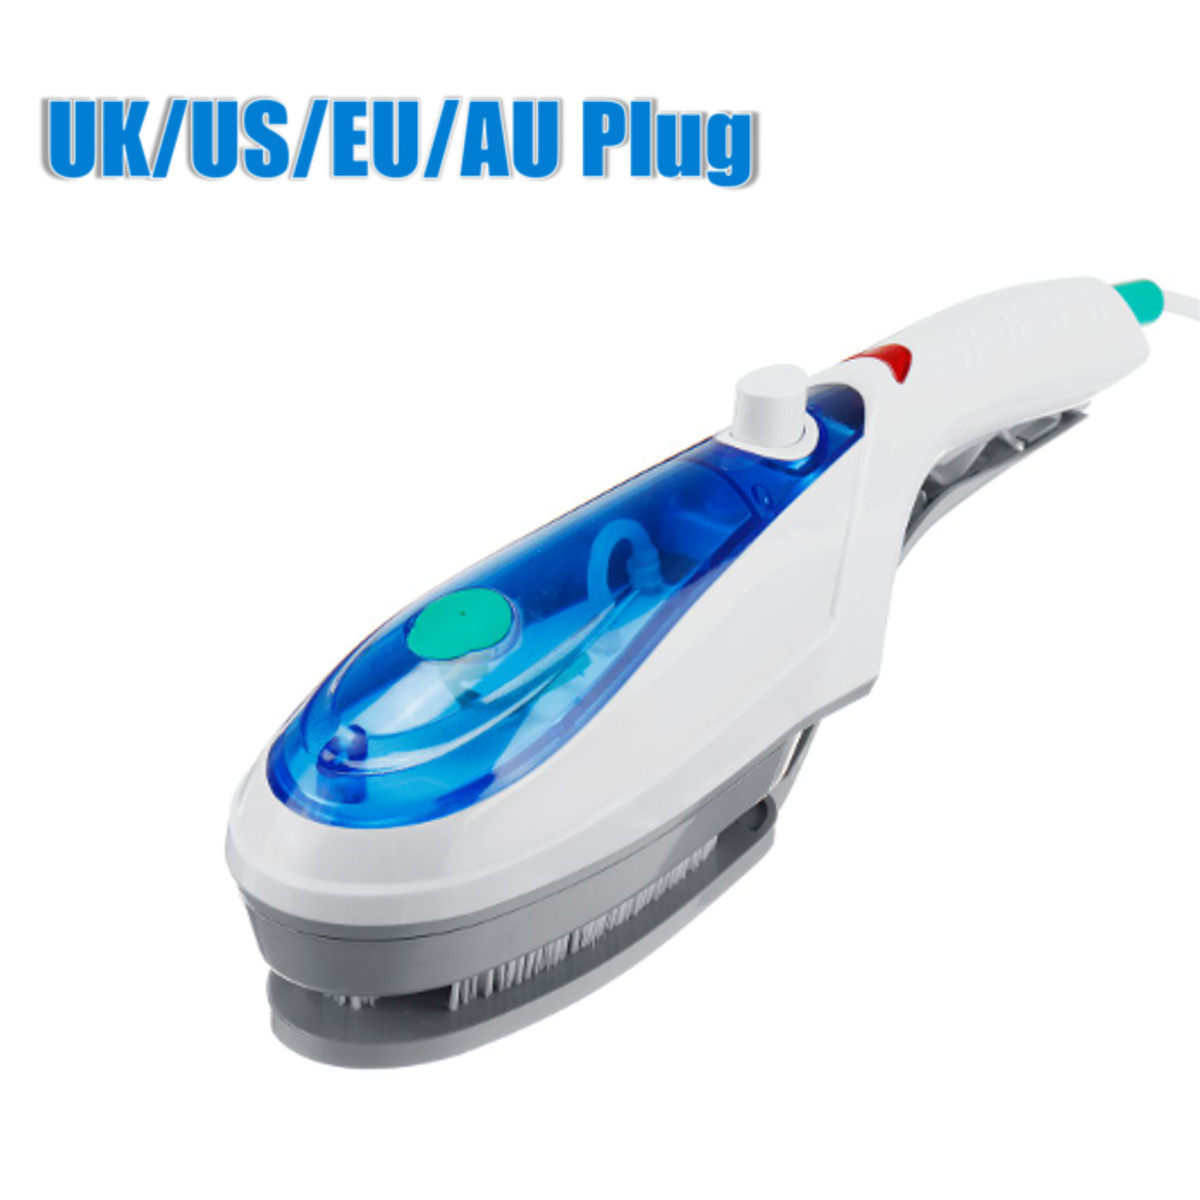 Protable-1000W-Electric-Steam-Iron-Handheld-Fabric-Laundry-Steamer-Brush-Travel-Soldering-Iron-Tips-1589841-2